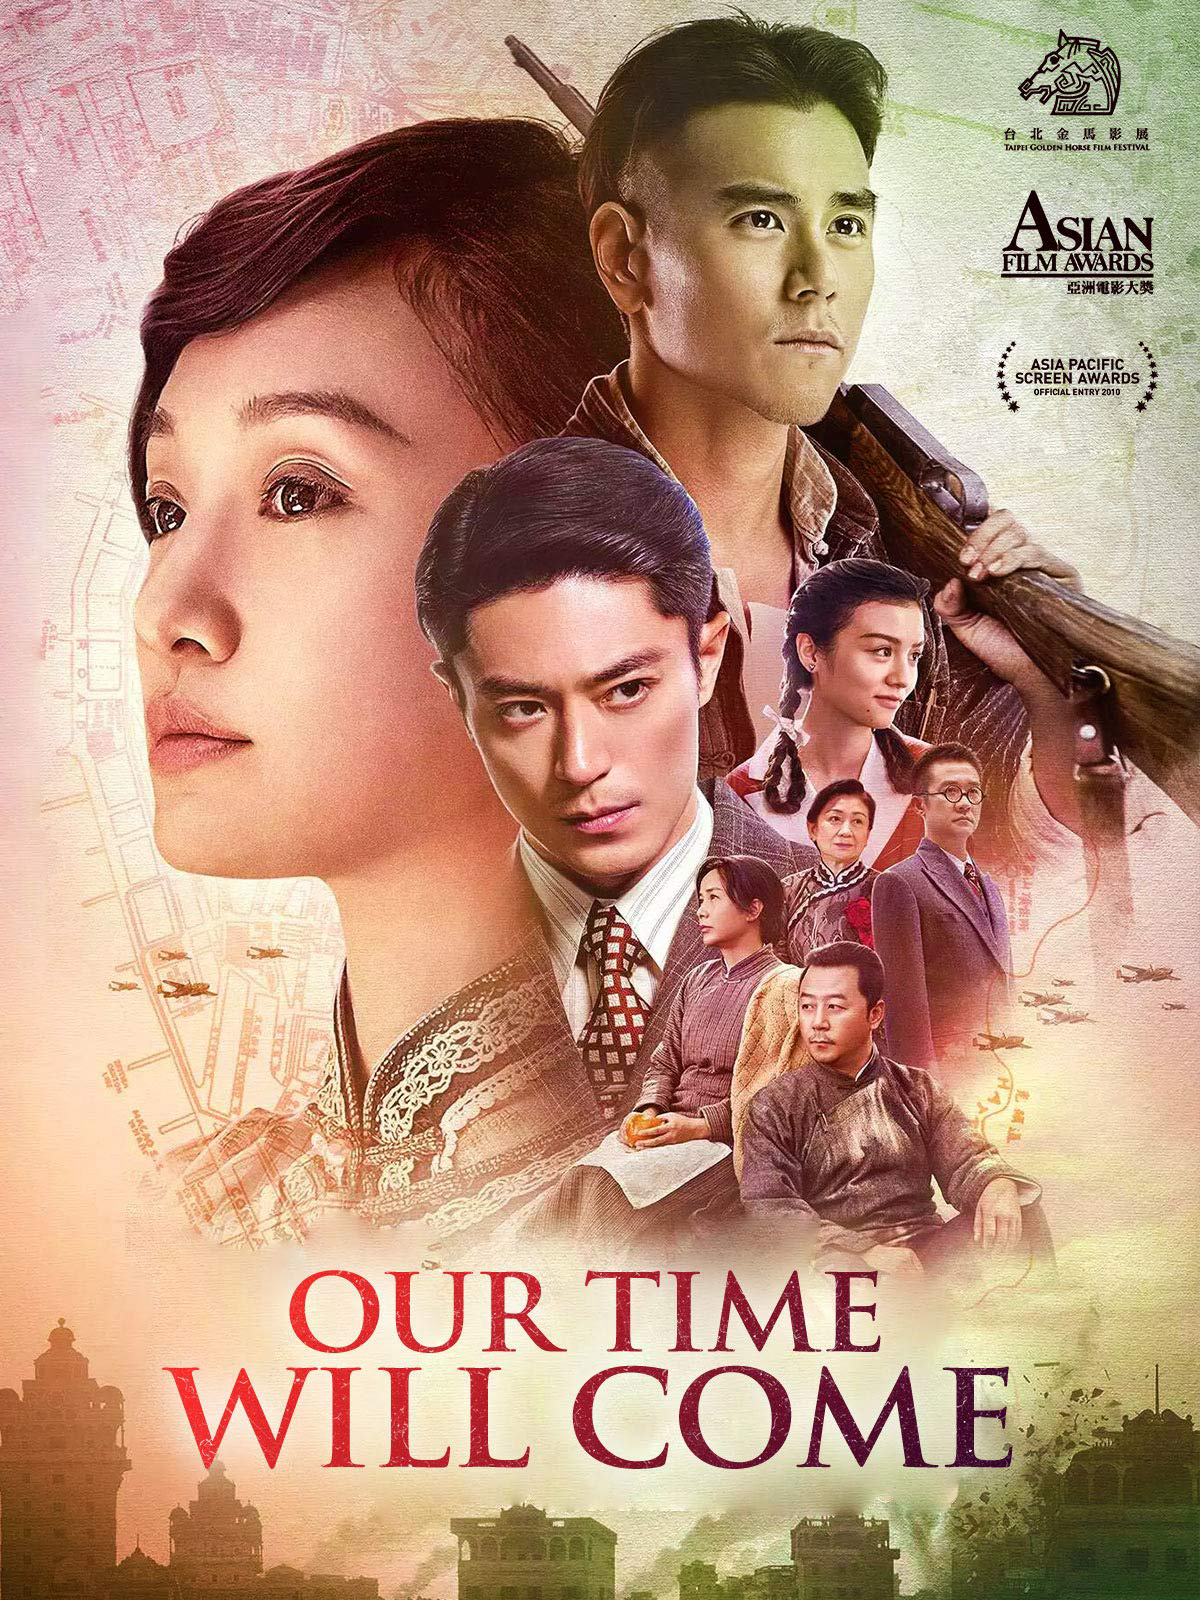 Bao Giờ Trăng Sáng (Our Time Will Come) [2017]